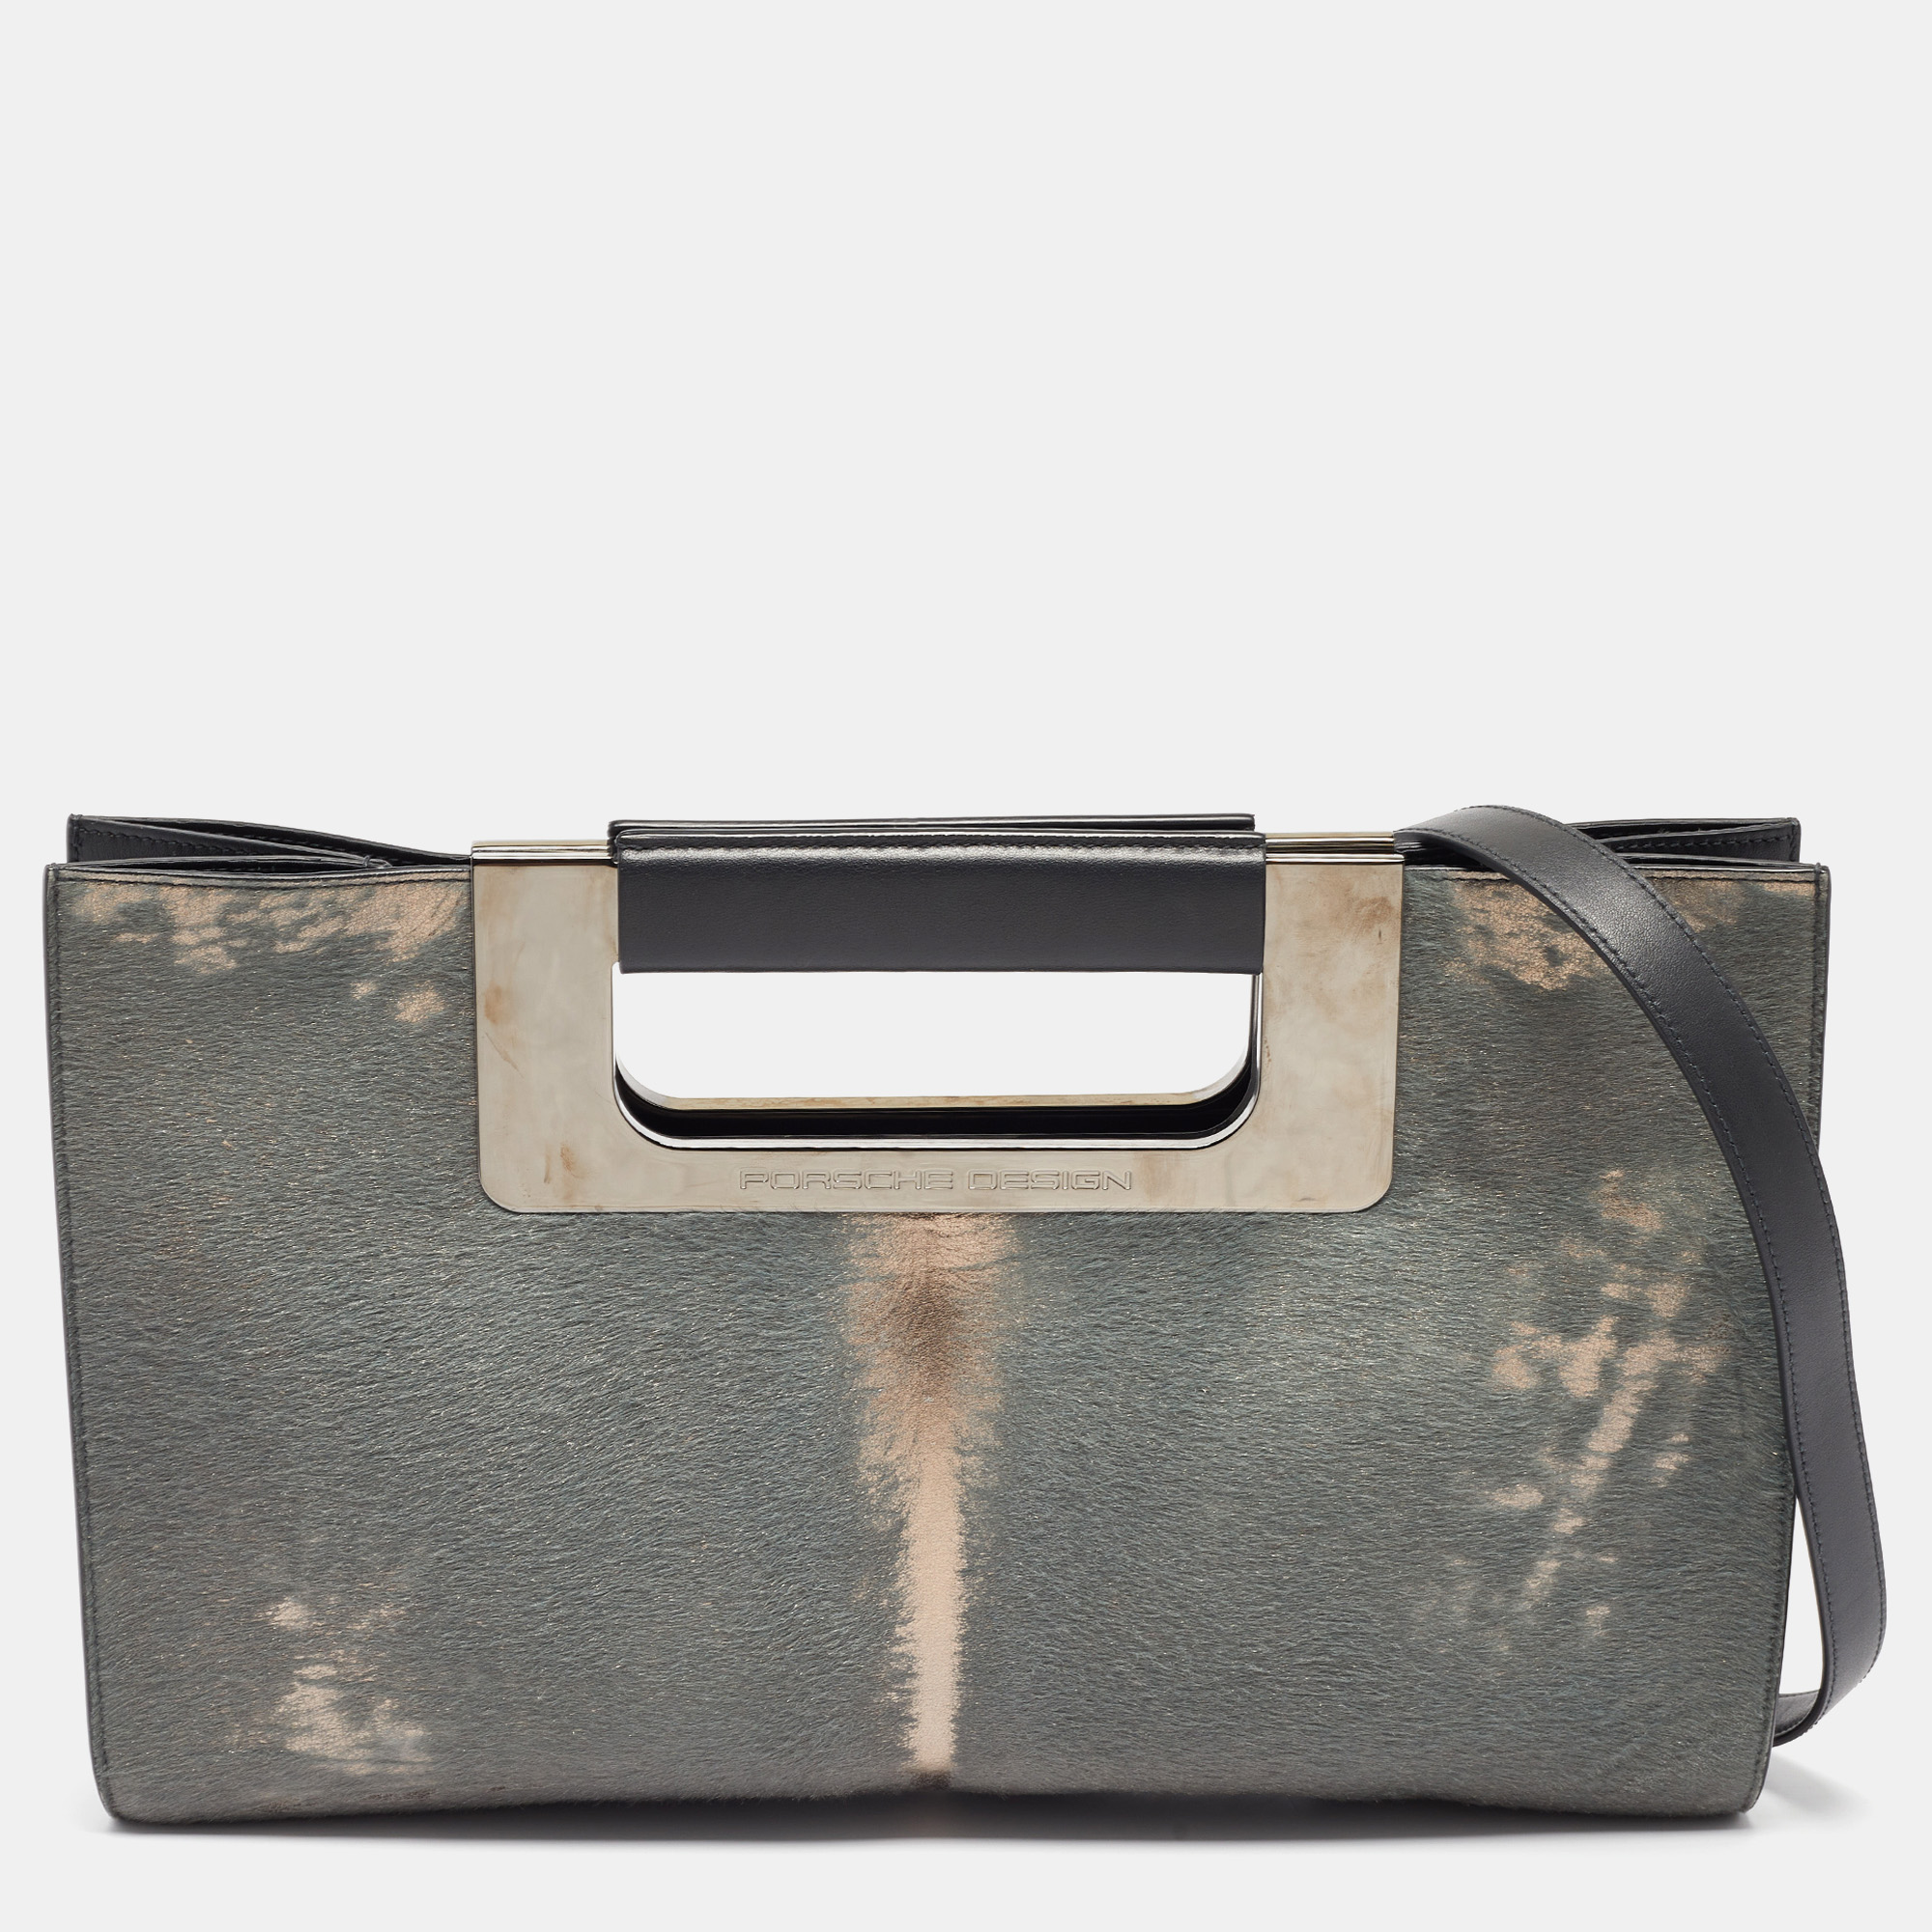 Porsche design grey/shimmer calfhair and leather cut out frame handle bag